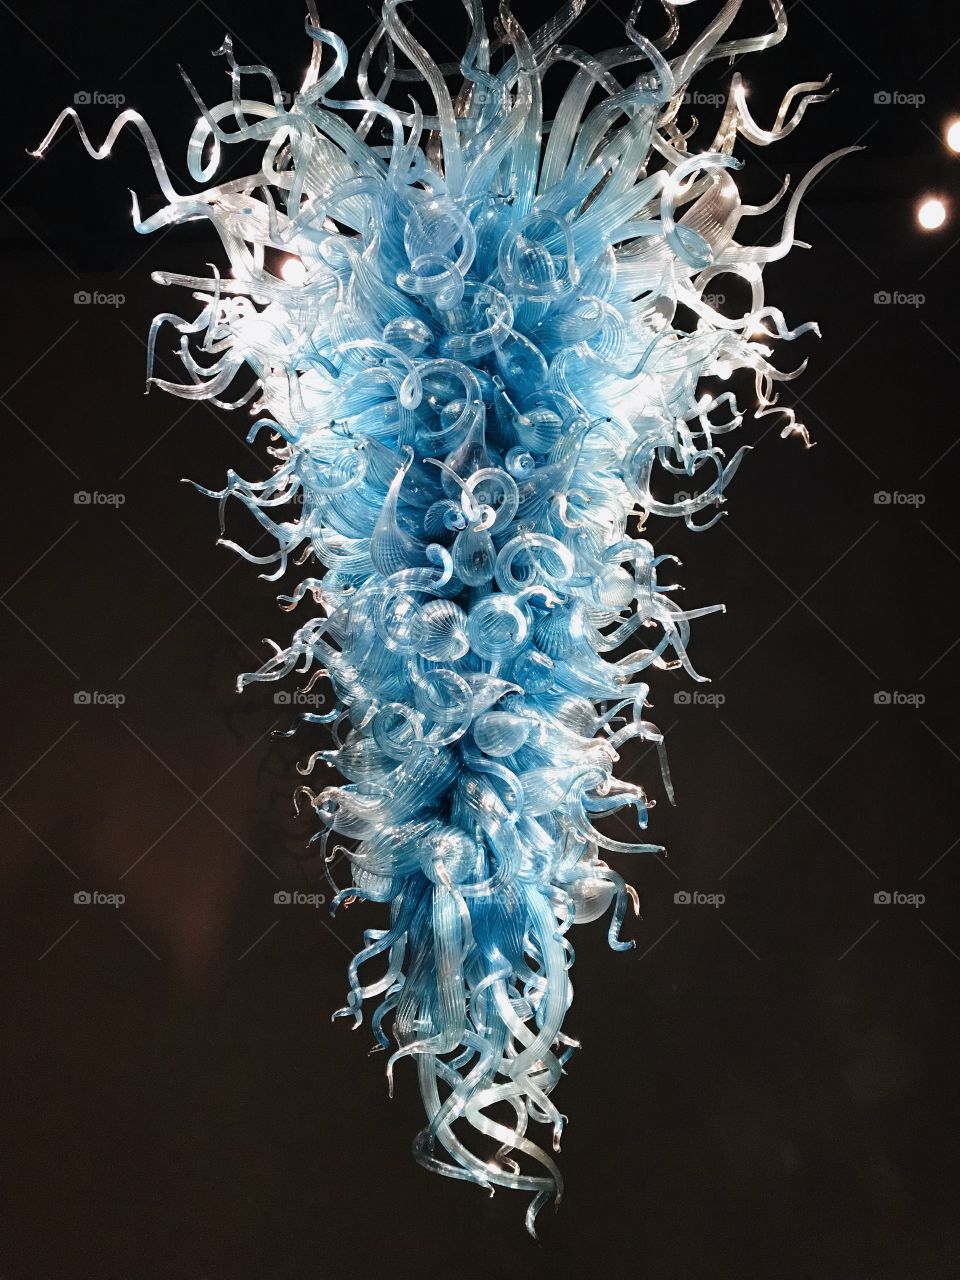 Gorgeous displays of Chihuly Glass with black backgrounds make the colors in the glass really stand out! 